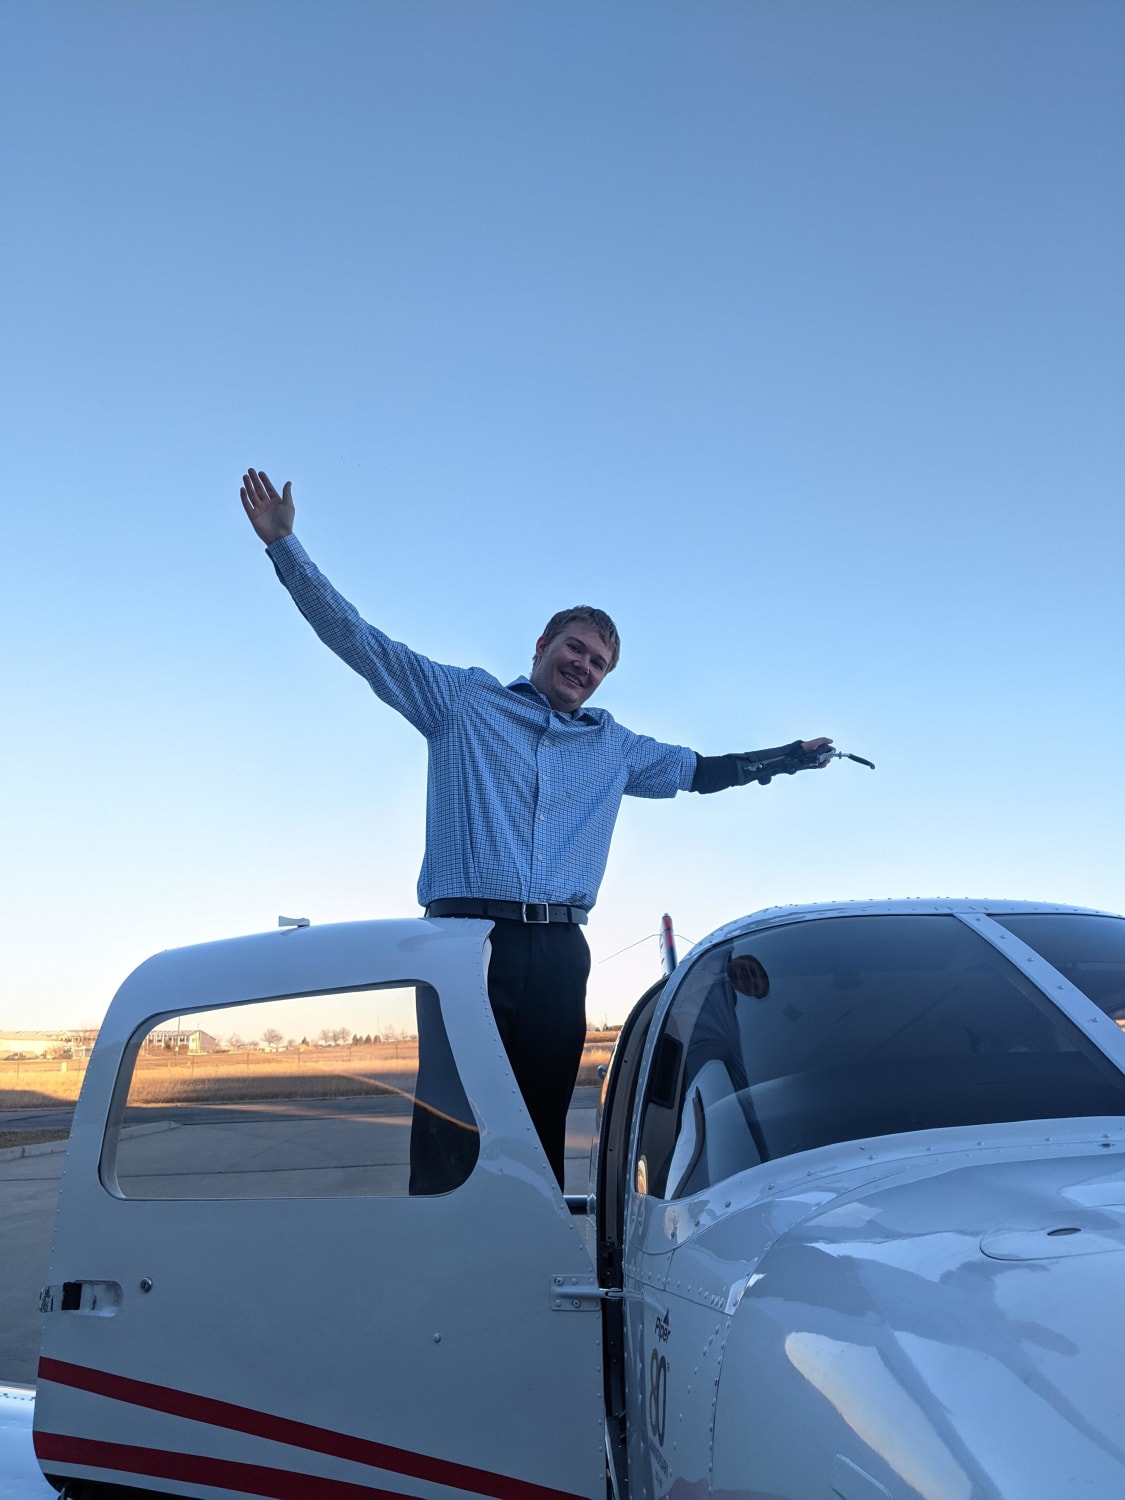 As of 12/04/2020 I'm a Commercial Pilot!! I wanted to prove to myself that my disability couldn't get in the way, and as such this is my greatest achievement to date! It's taken 5 years and 450 hours TT! Any suggestions or advice on what to do now that the job market is barren?